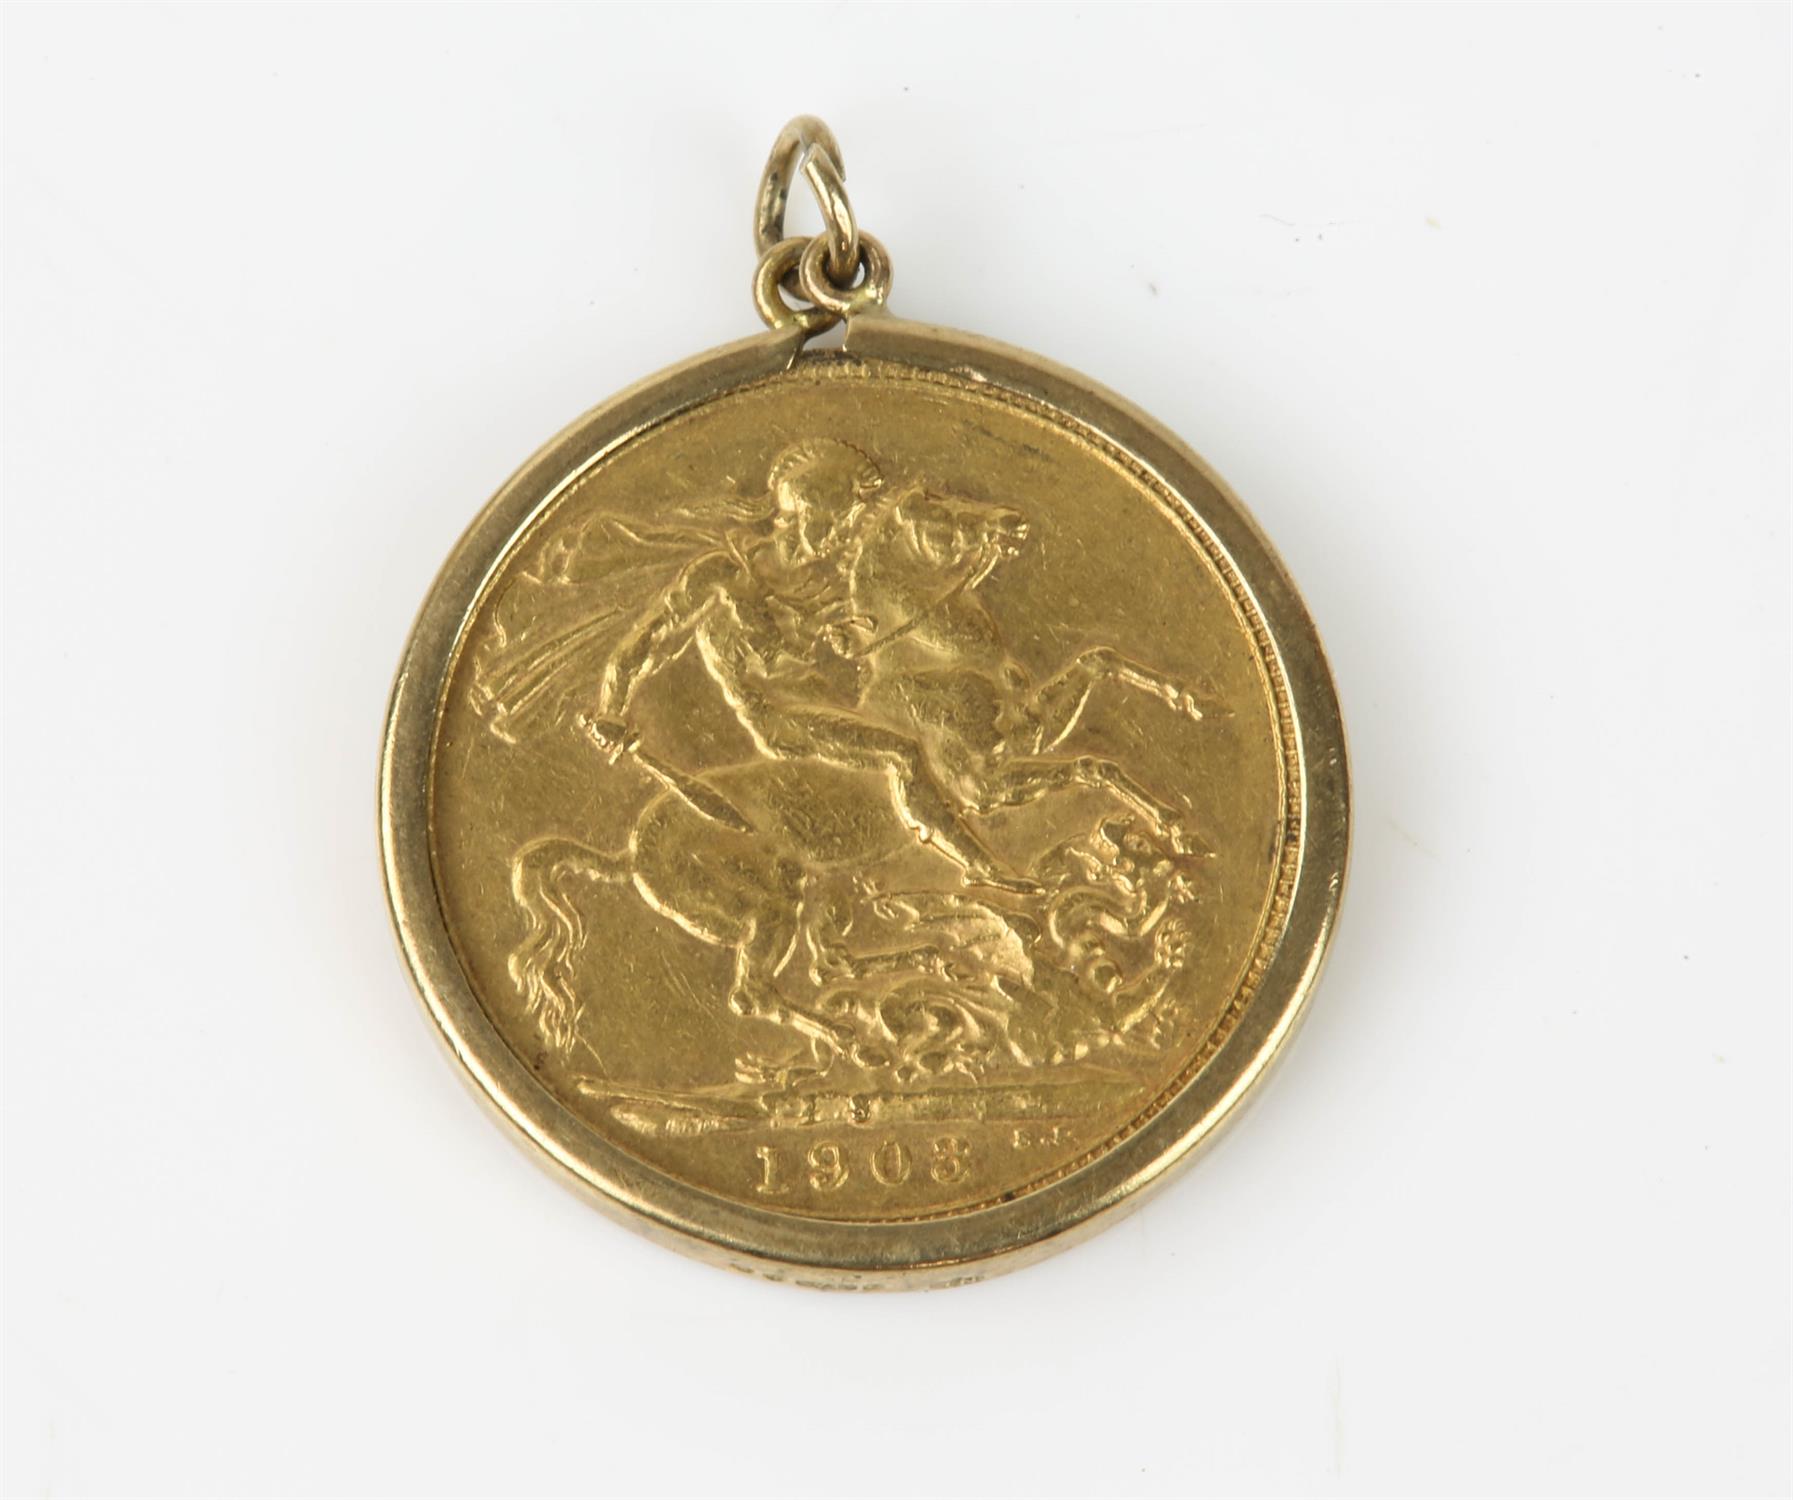 A sovereign pendant, set with an Edward VII full sovereign, dated 1903 in a 9ct yellow gold pendant